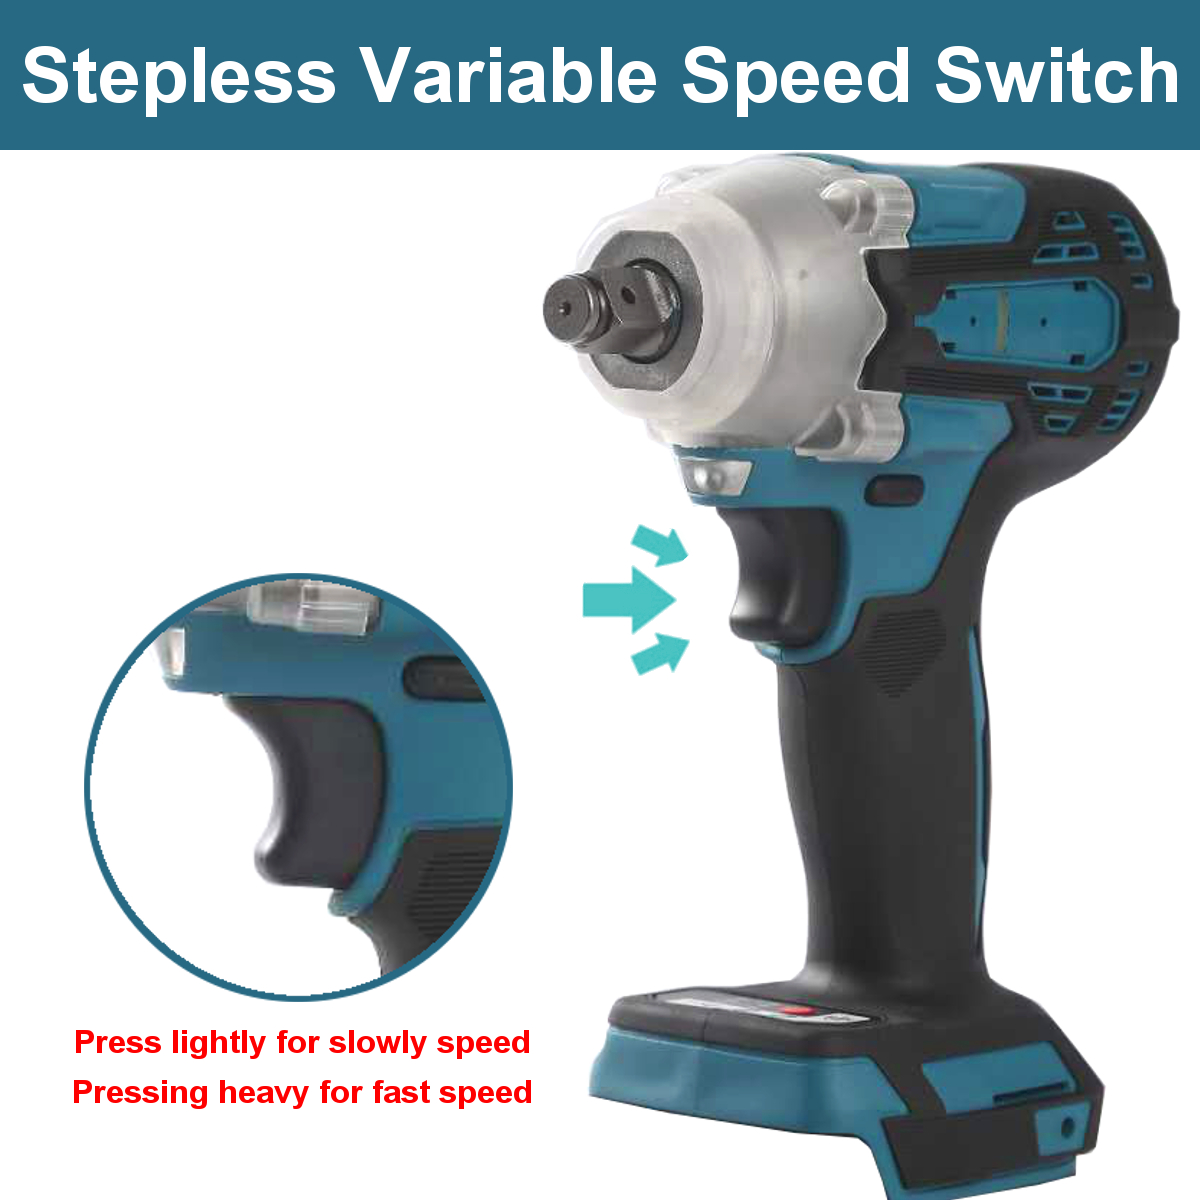 800Nm-Brushless-Cordless-12-Impact-Wrench-Driver-Replacement-for-Makita-18V-Battery-1765713-6